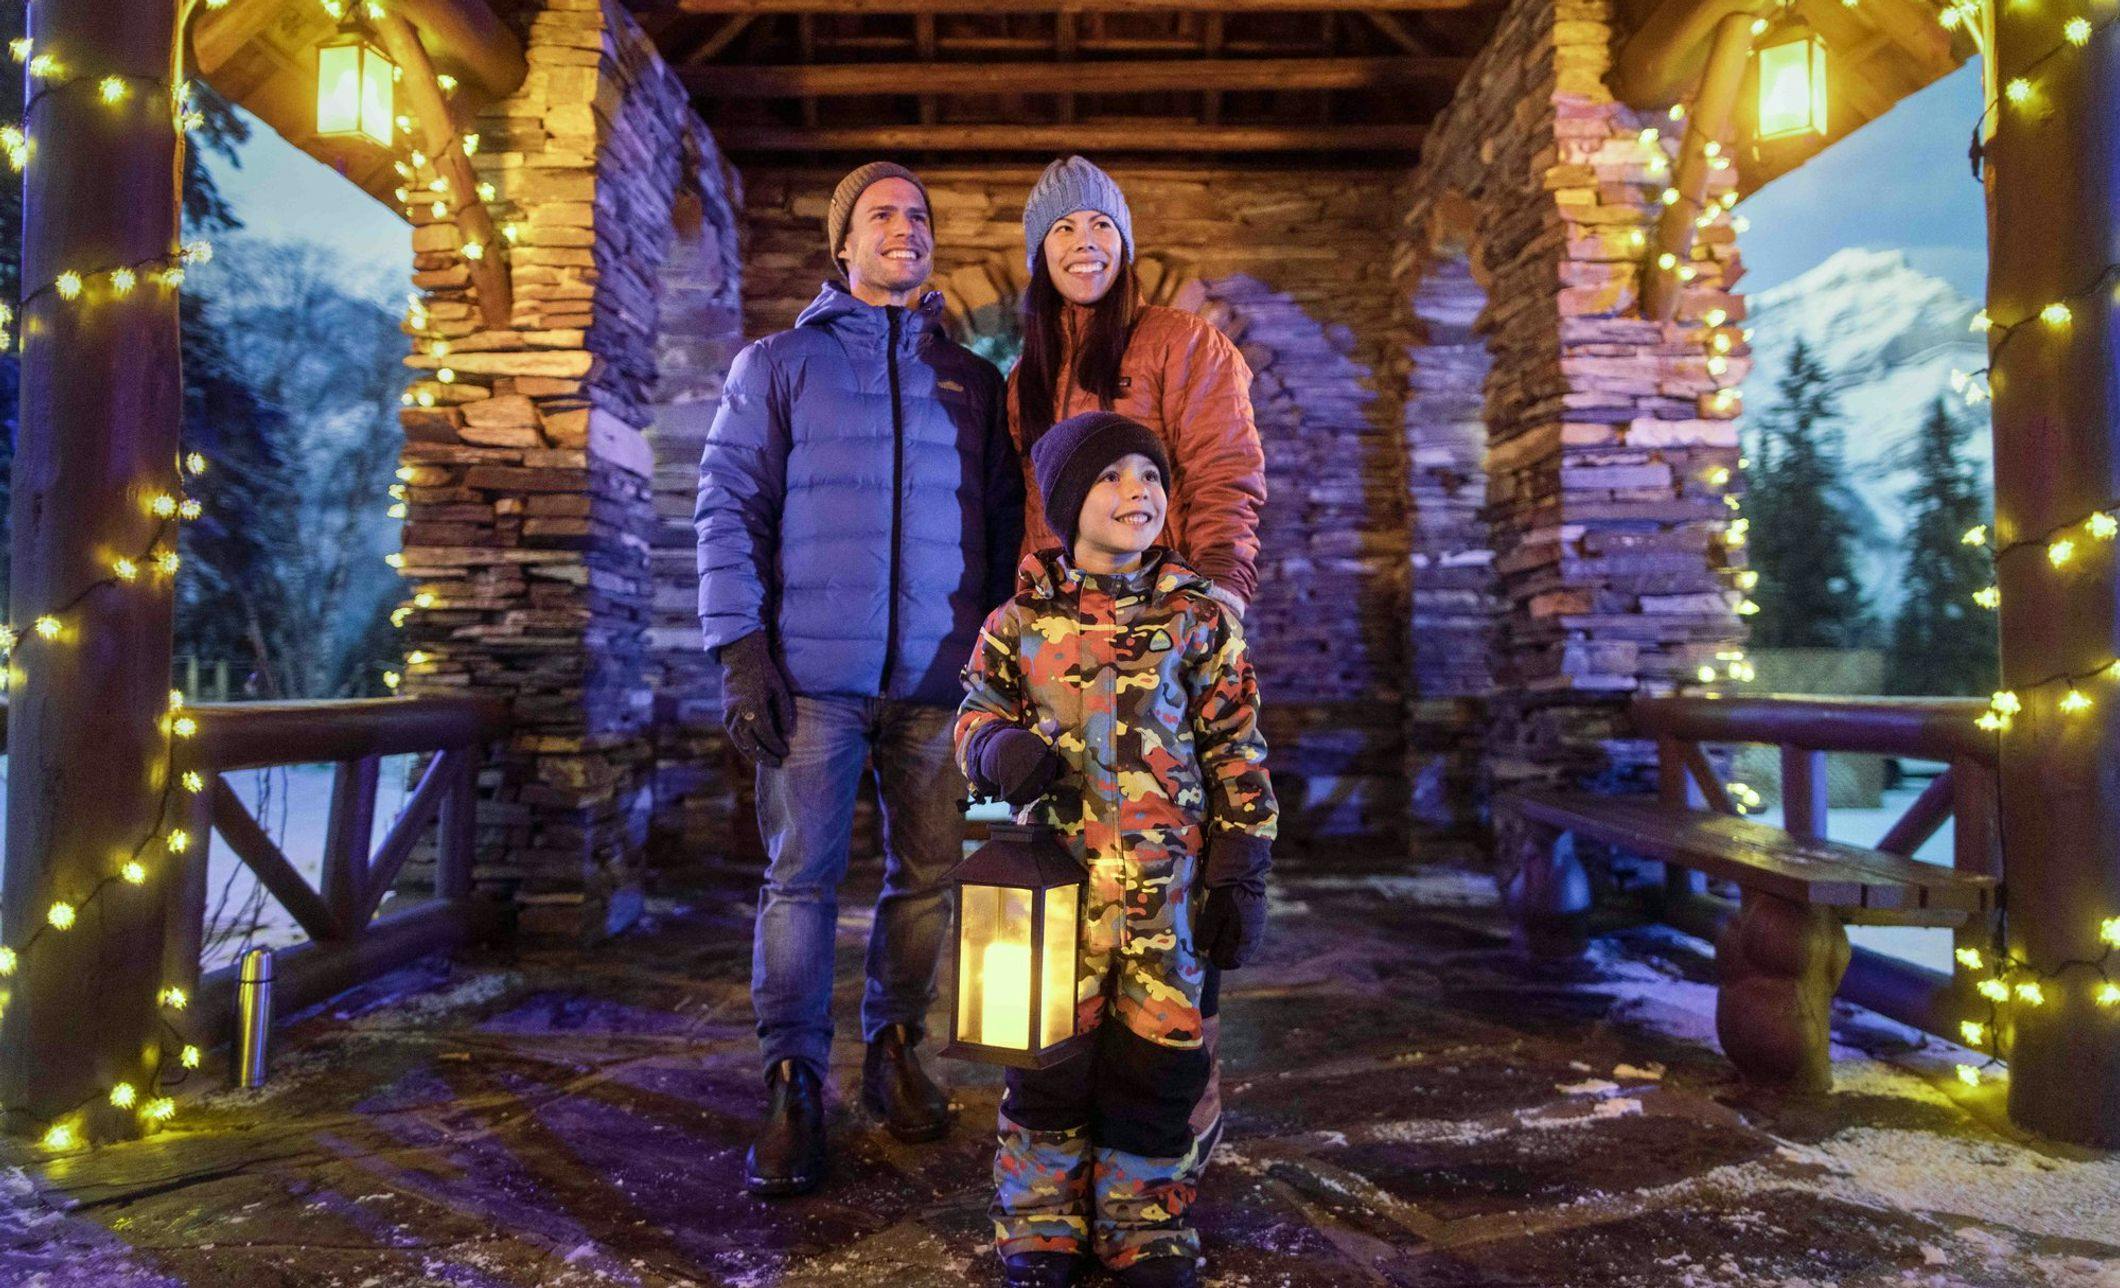 A family exploring Christmas lights using a handheld lantern in the winter months